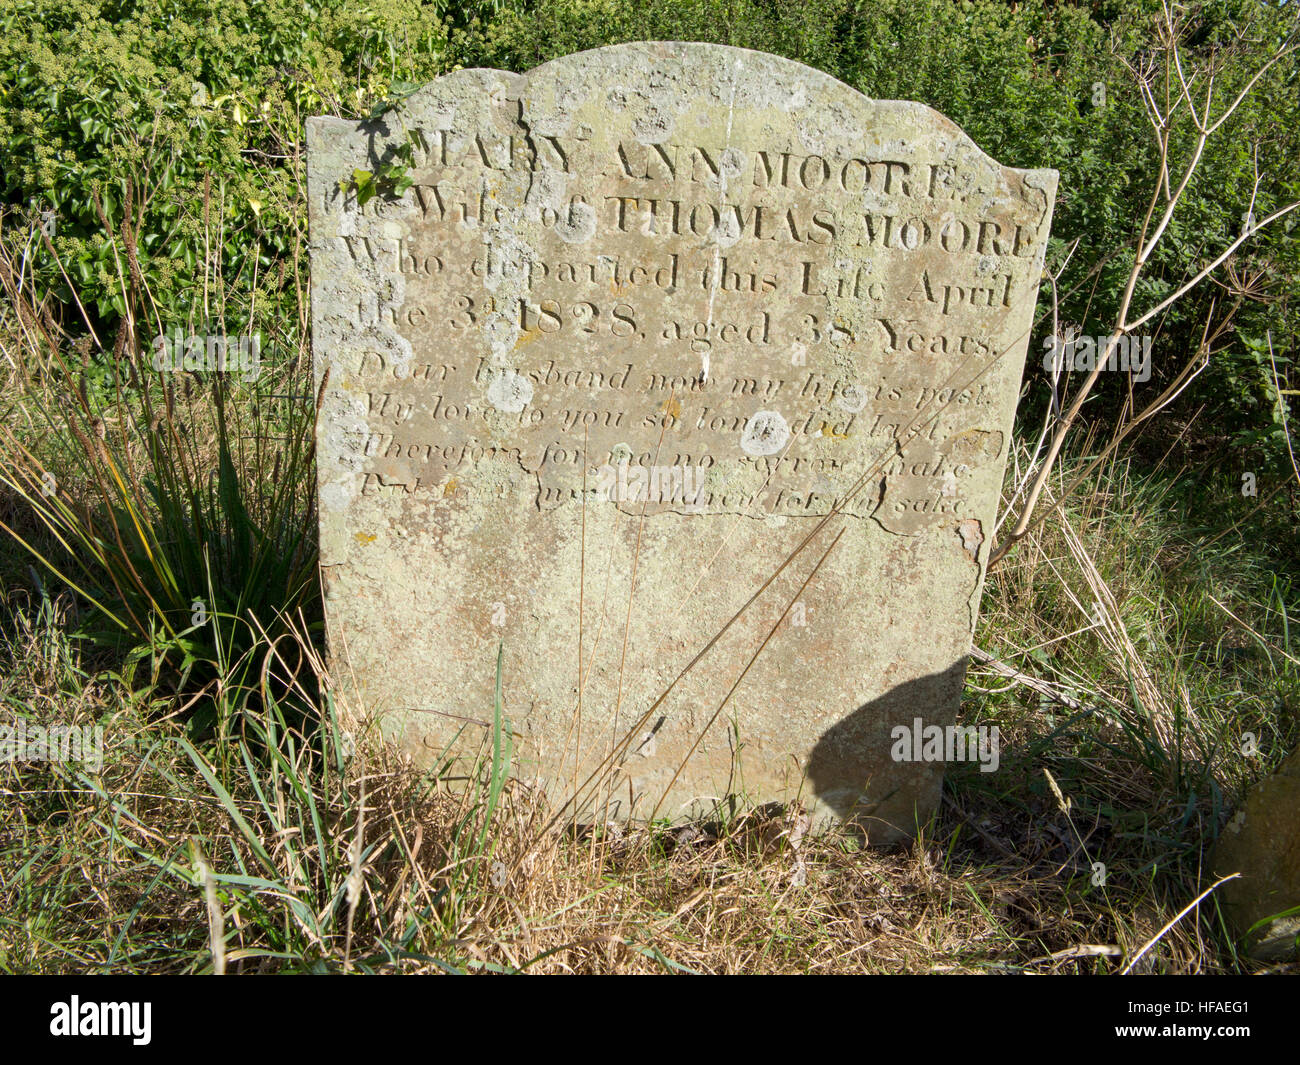 19th century slab sandstone headstone with ornate top and carved dedicated front in rough grass area Stock Photo